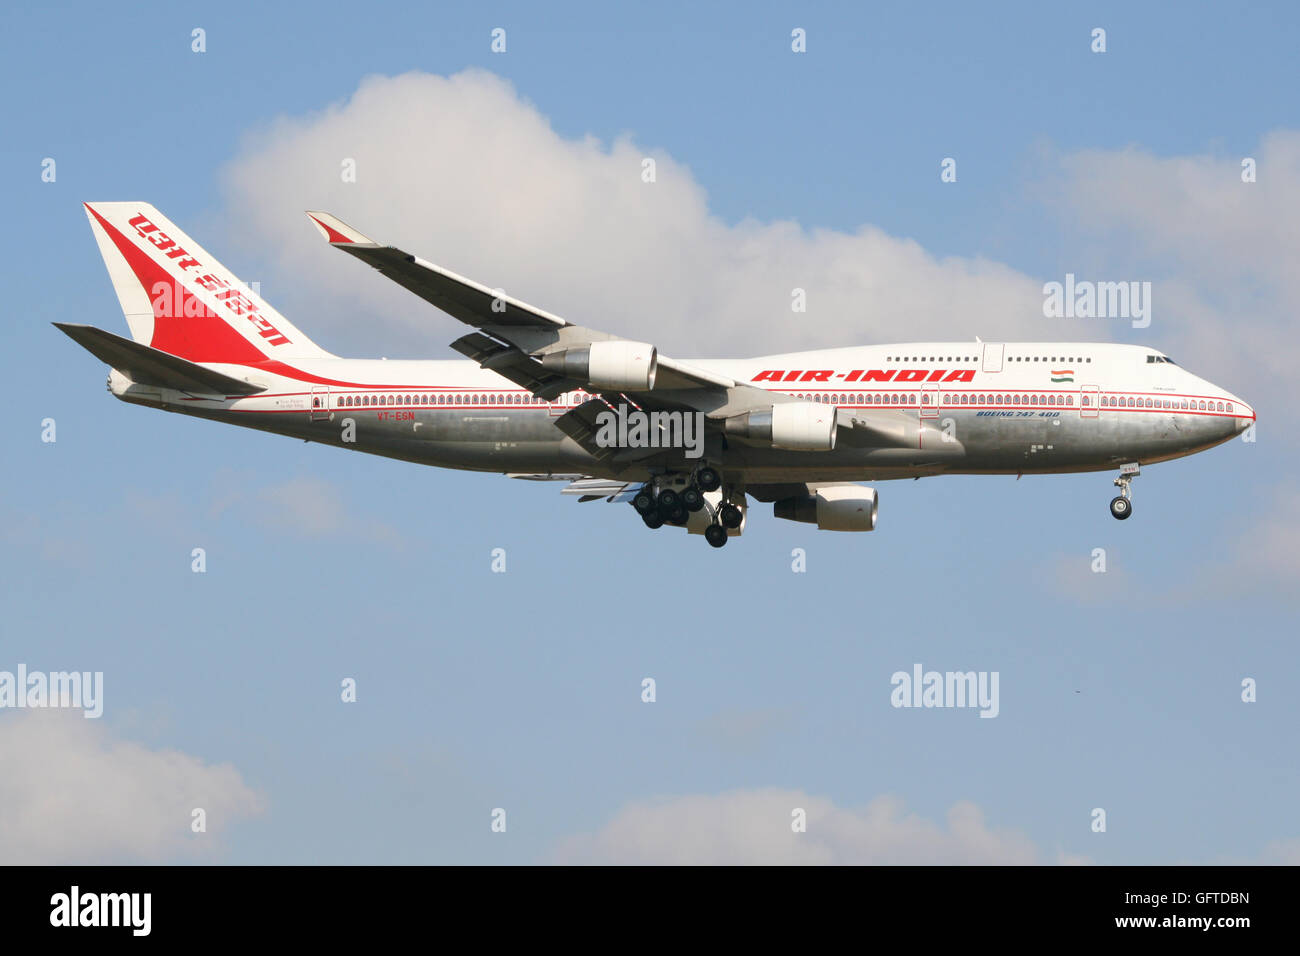 Frankurt/Germany March 12, 2012: Old Boeing 747 from Air India at Frankfurt Airport. Stock Photo